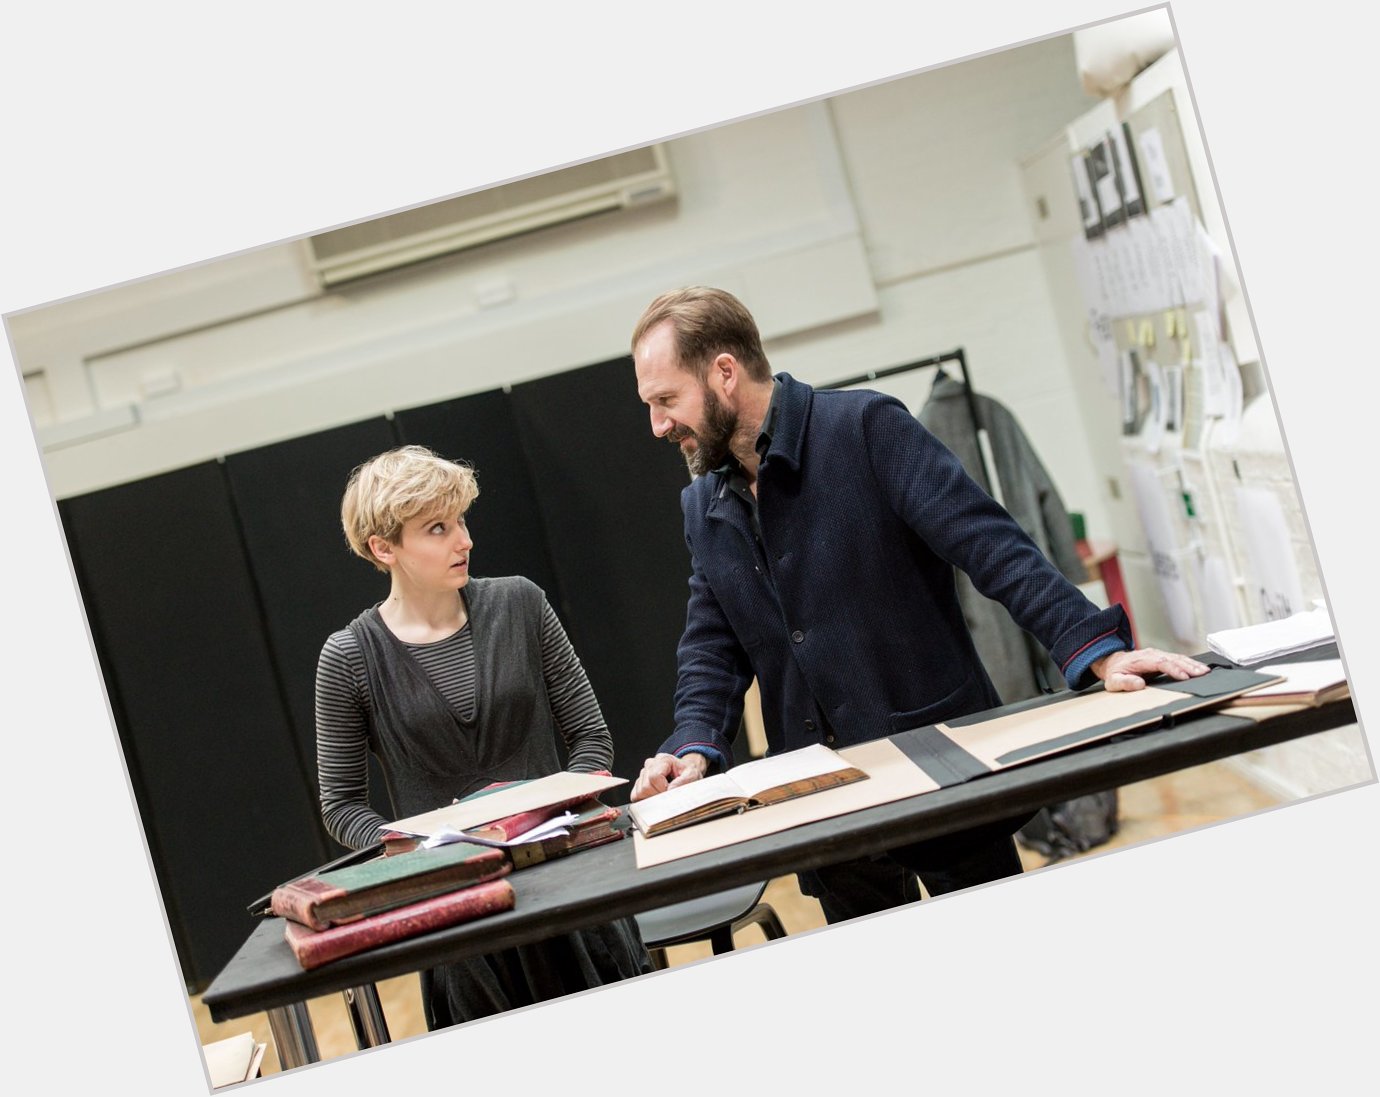 Happy Birthday to Ralph Fiennes! To celebrate: some shots of The Master Builder rehearsals  